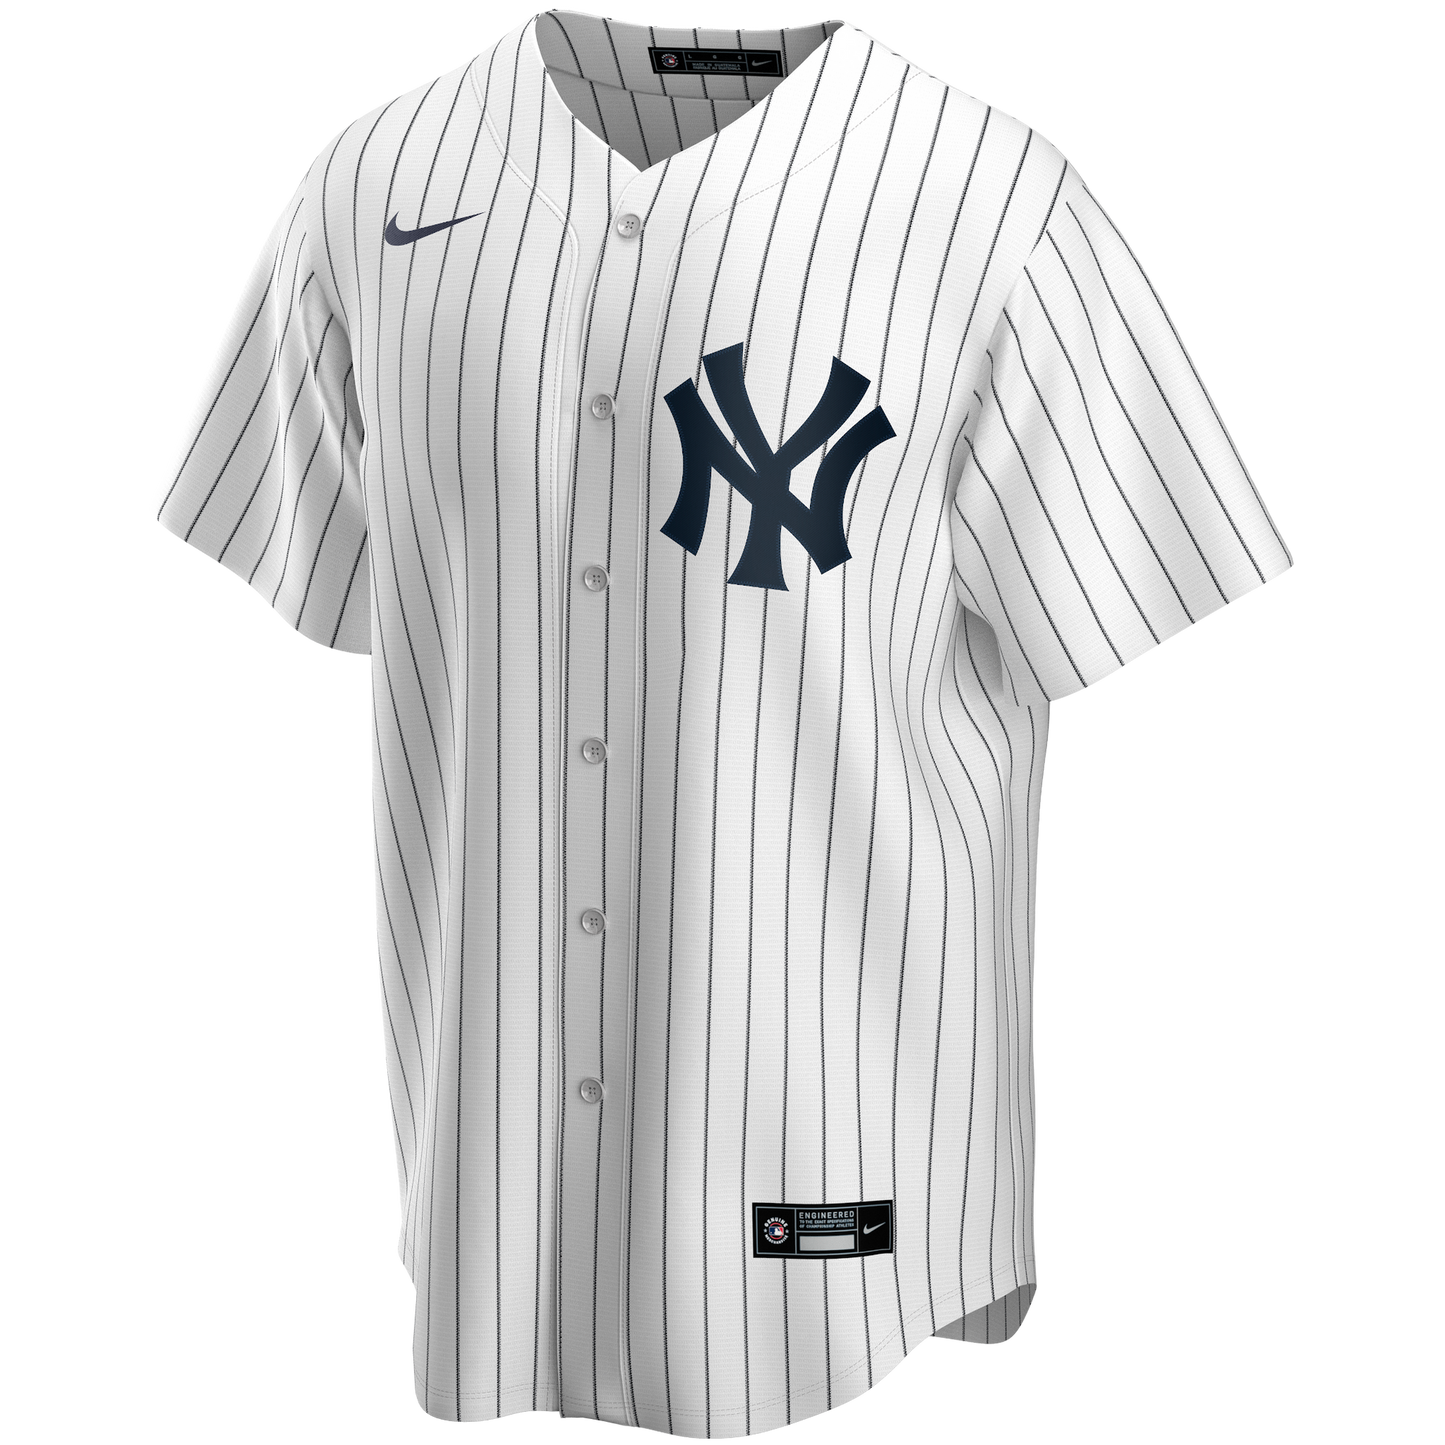 Men's Nike Mariano Rivera White New York Yankees Home Official Replica Player Jersey